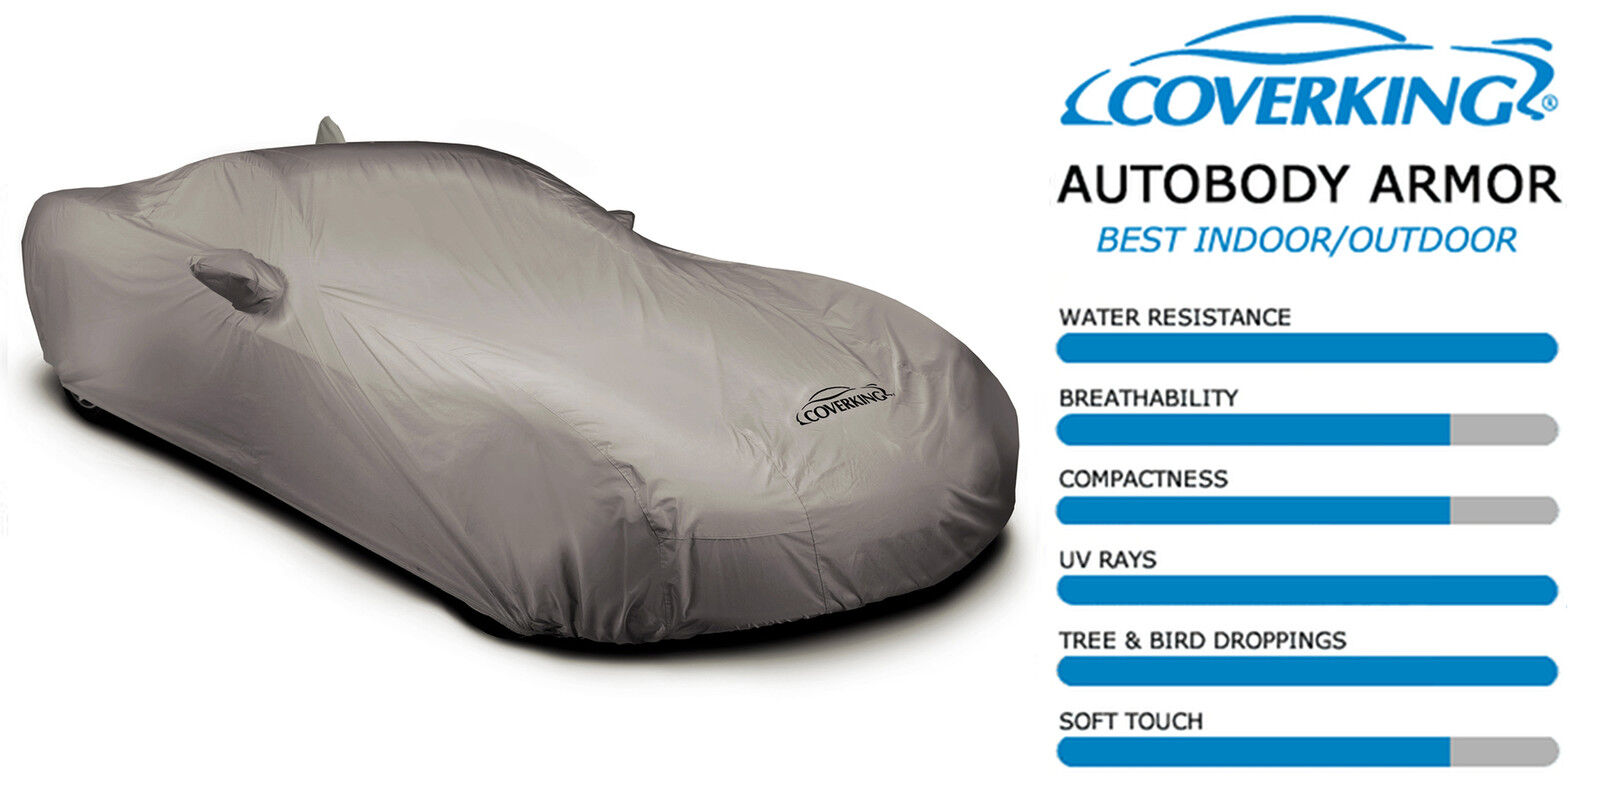 COVERKING AUTOBODY ARMOR all-weather CAR COVER fits 2005-2014 Aston Martin DB9